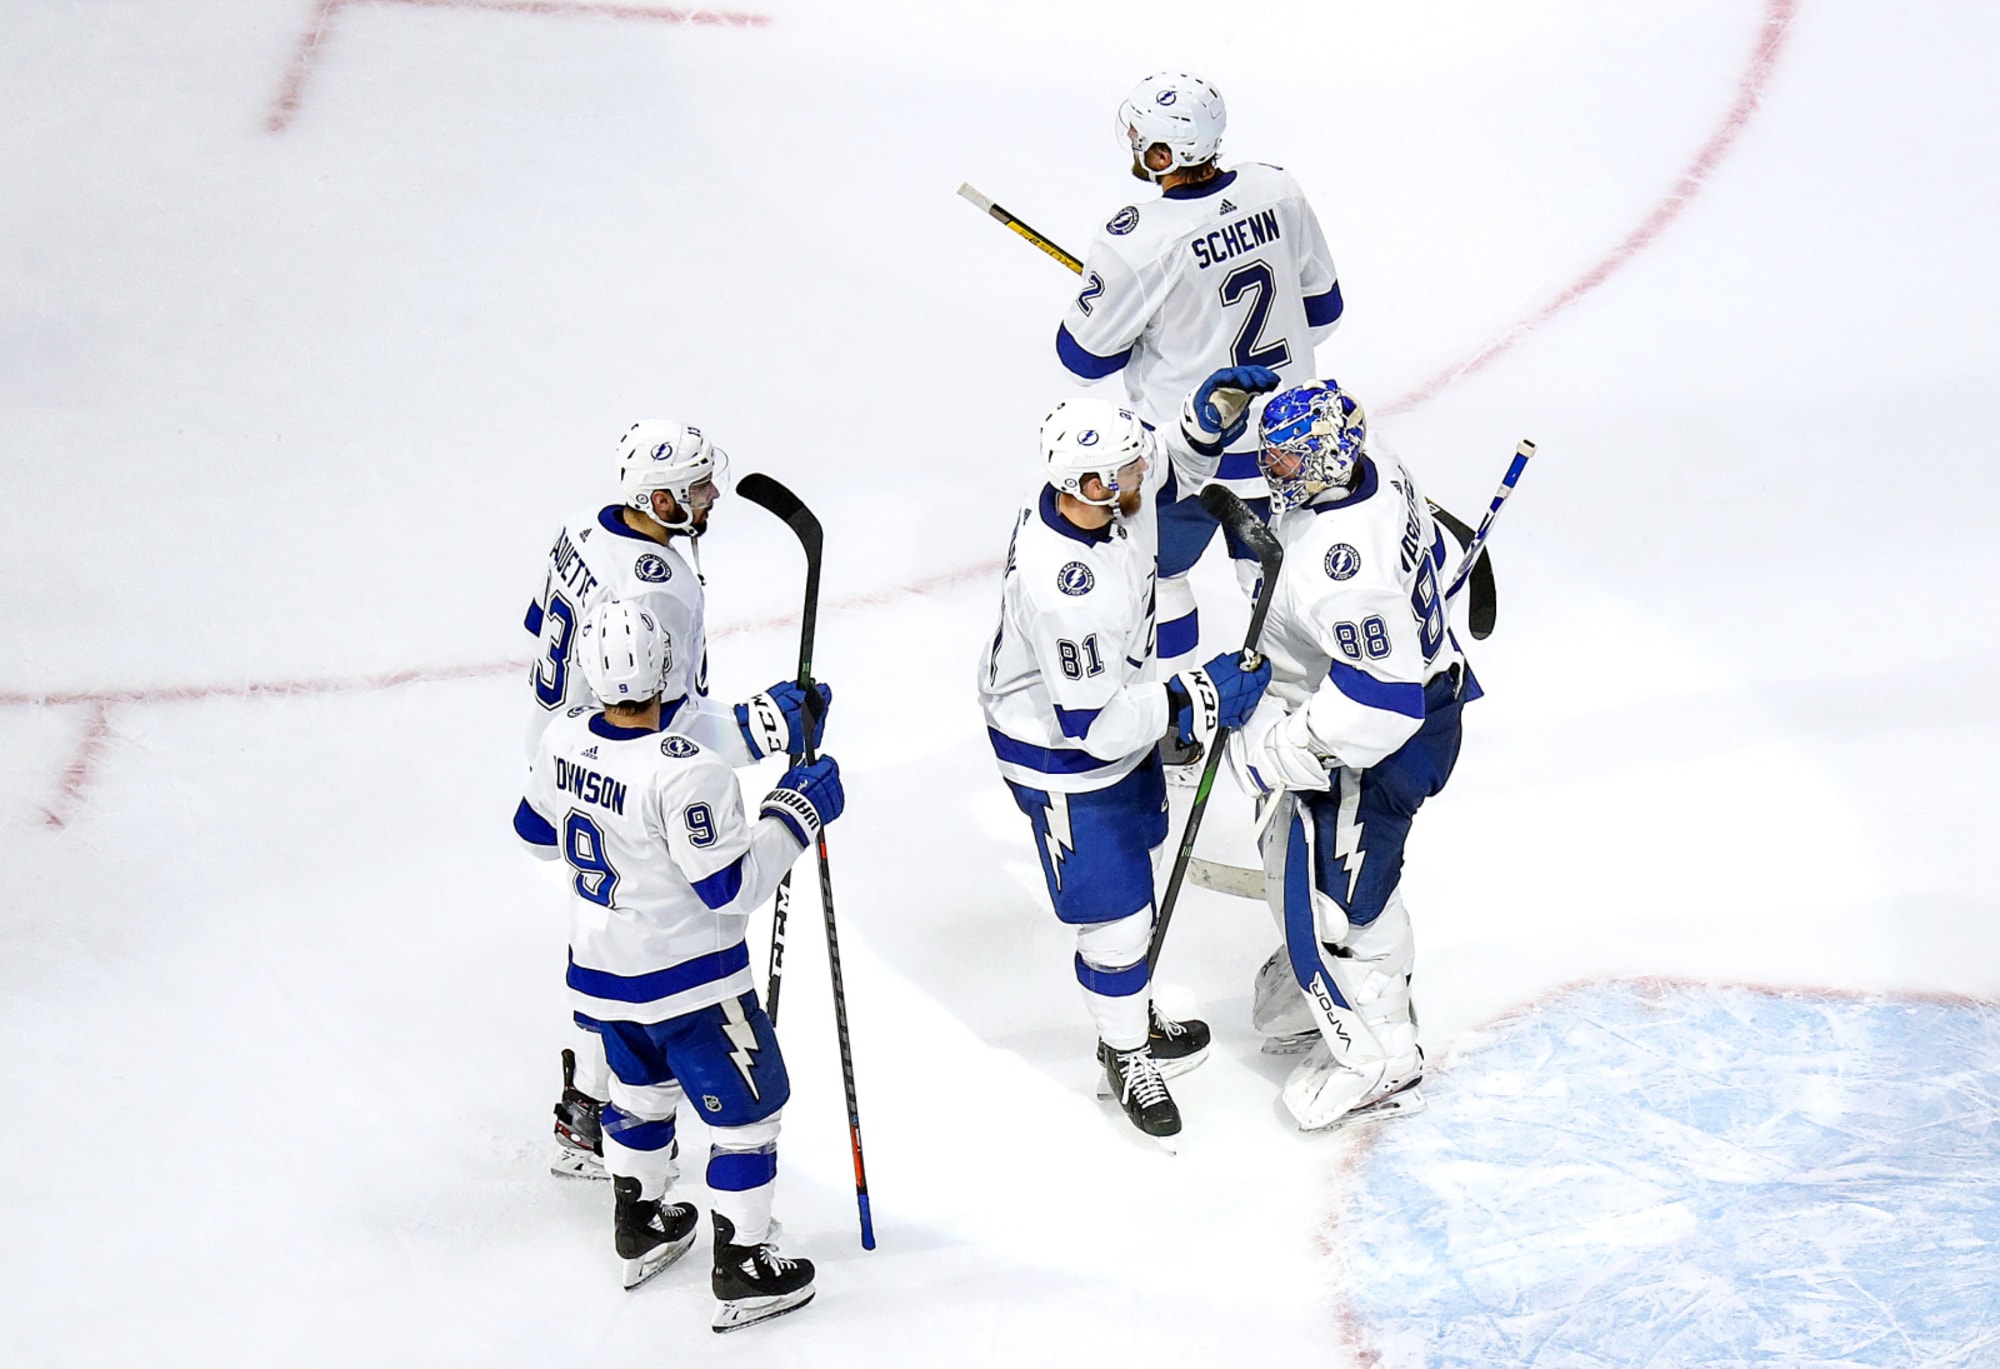 Tampa Bay Lightning transition game unmatchable for Islanders in Game 4